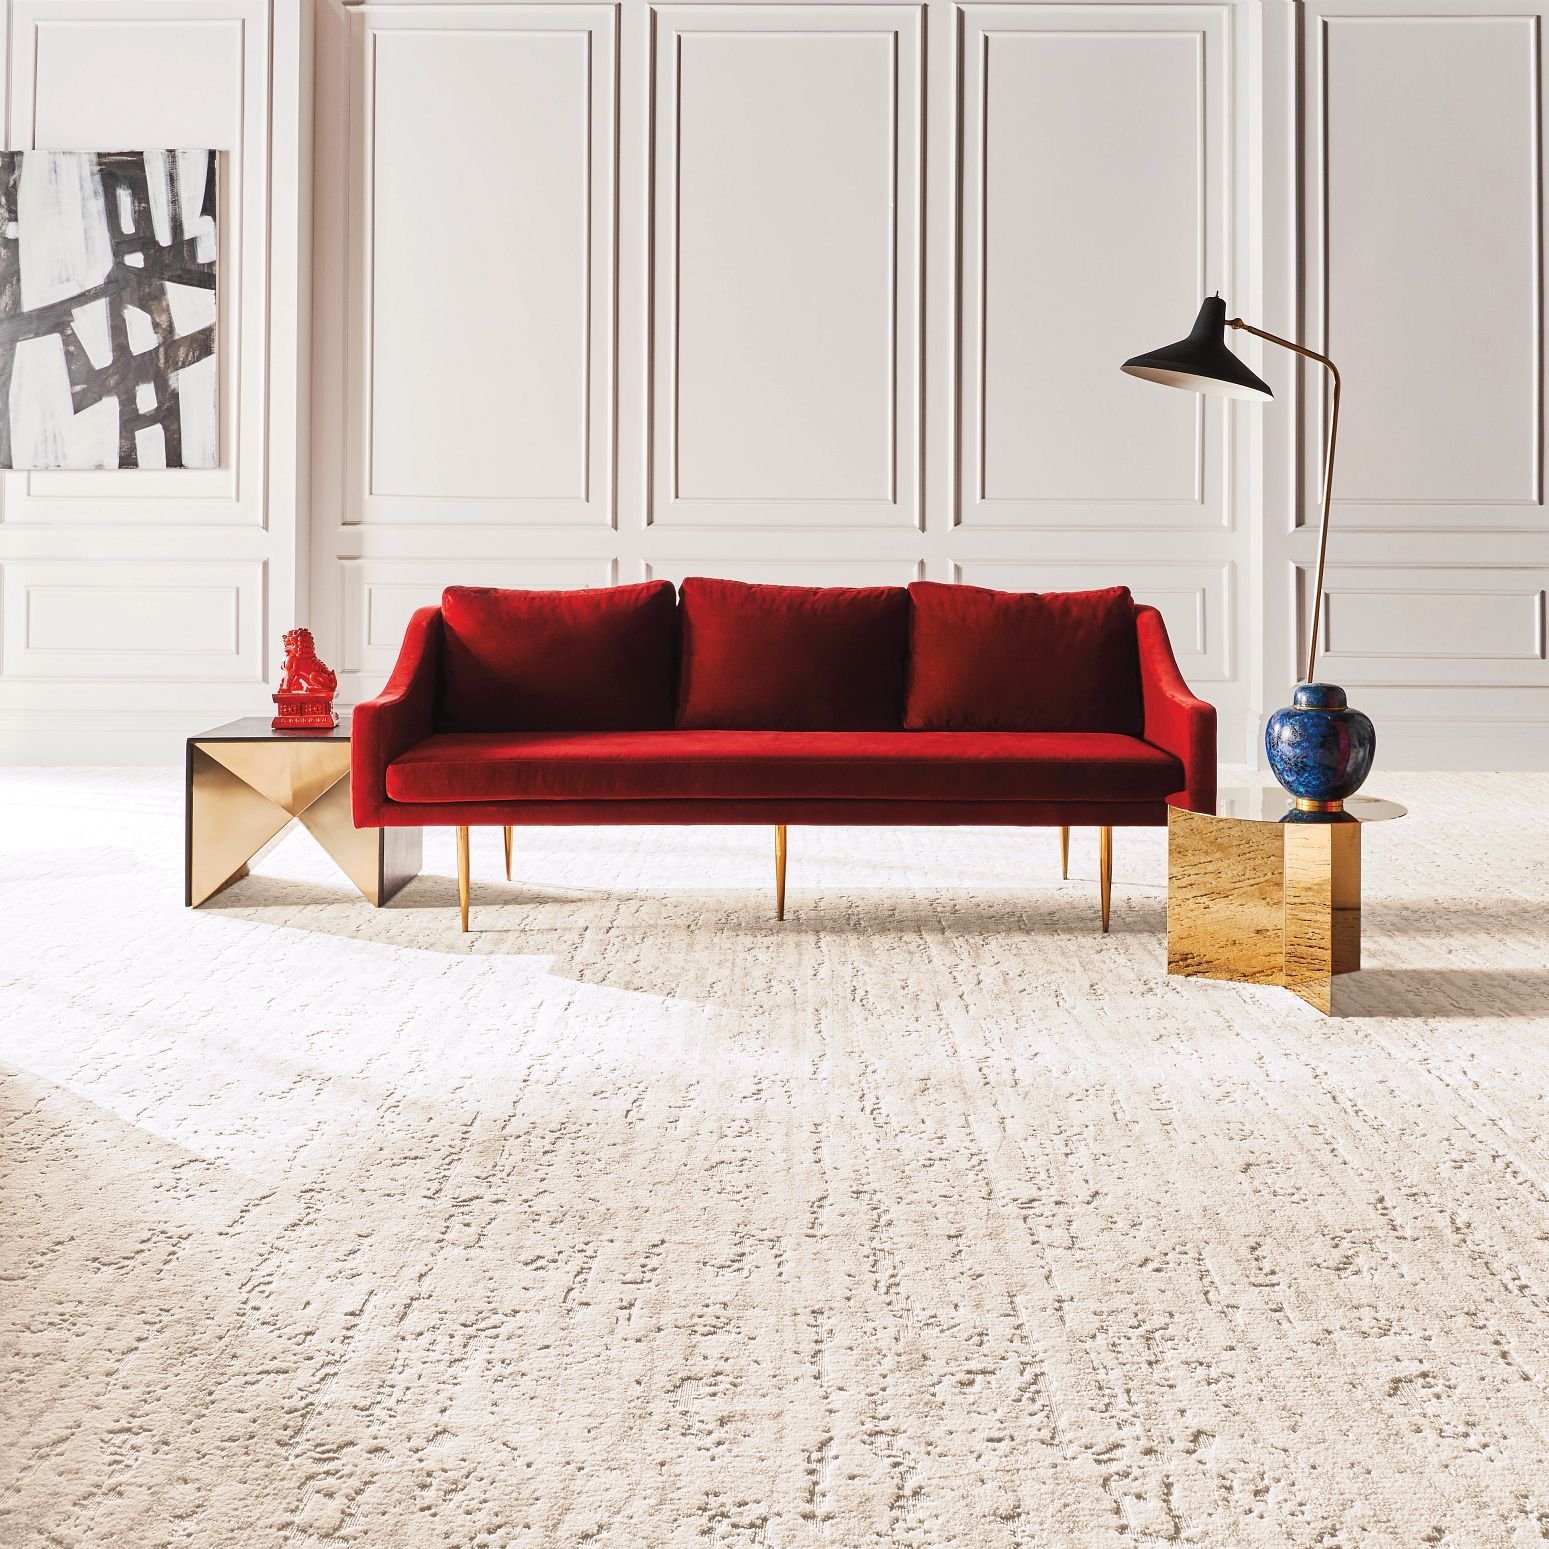 Red sofa on beige carpet from Flooring Xpress Enterprise and Design in Chicago, IL